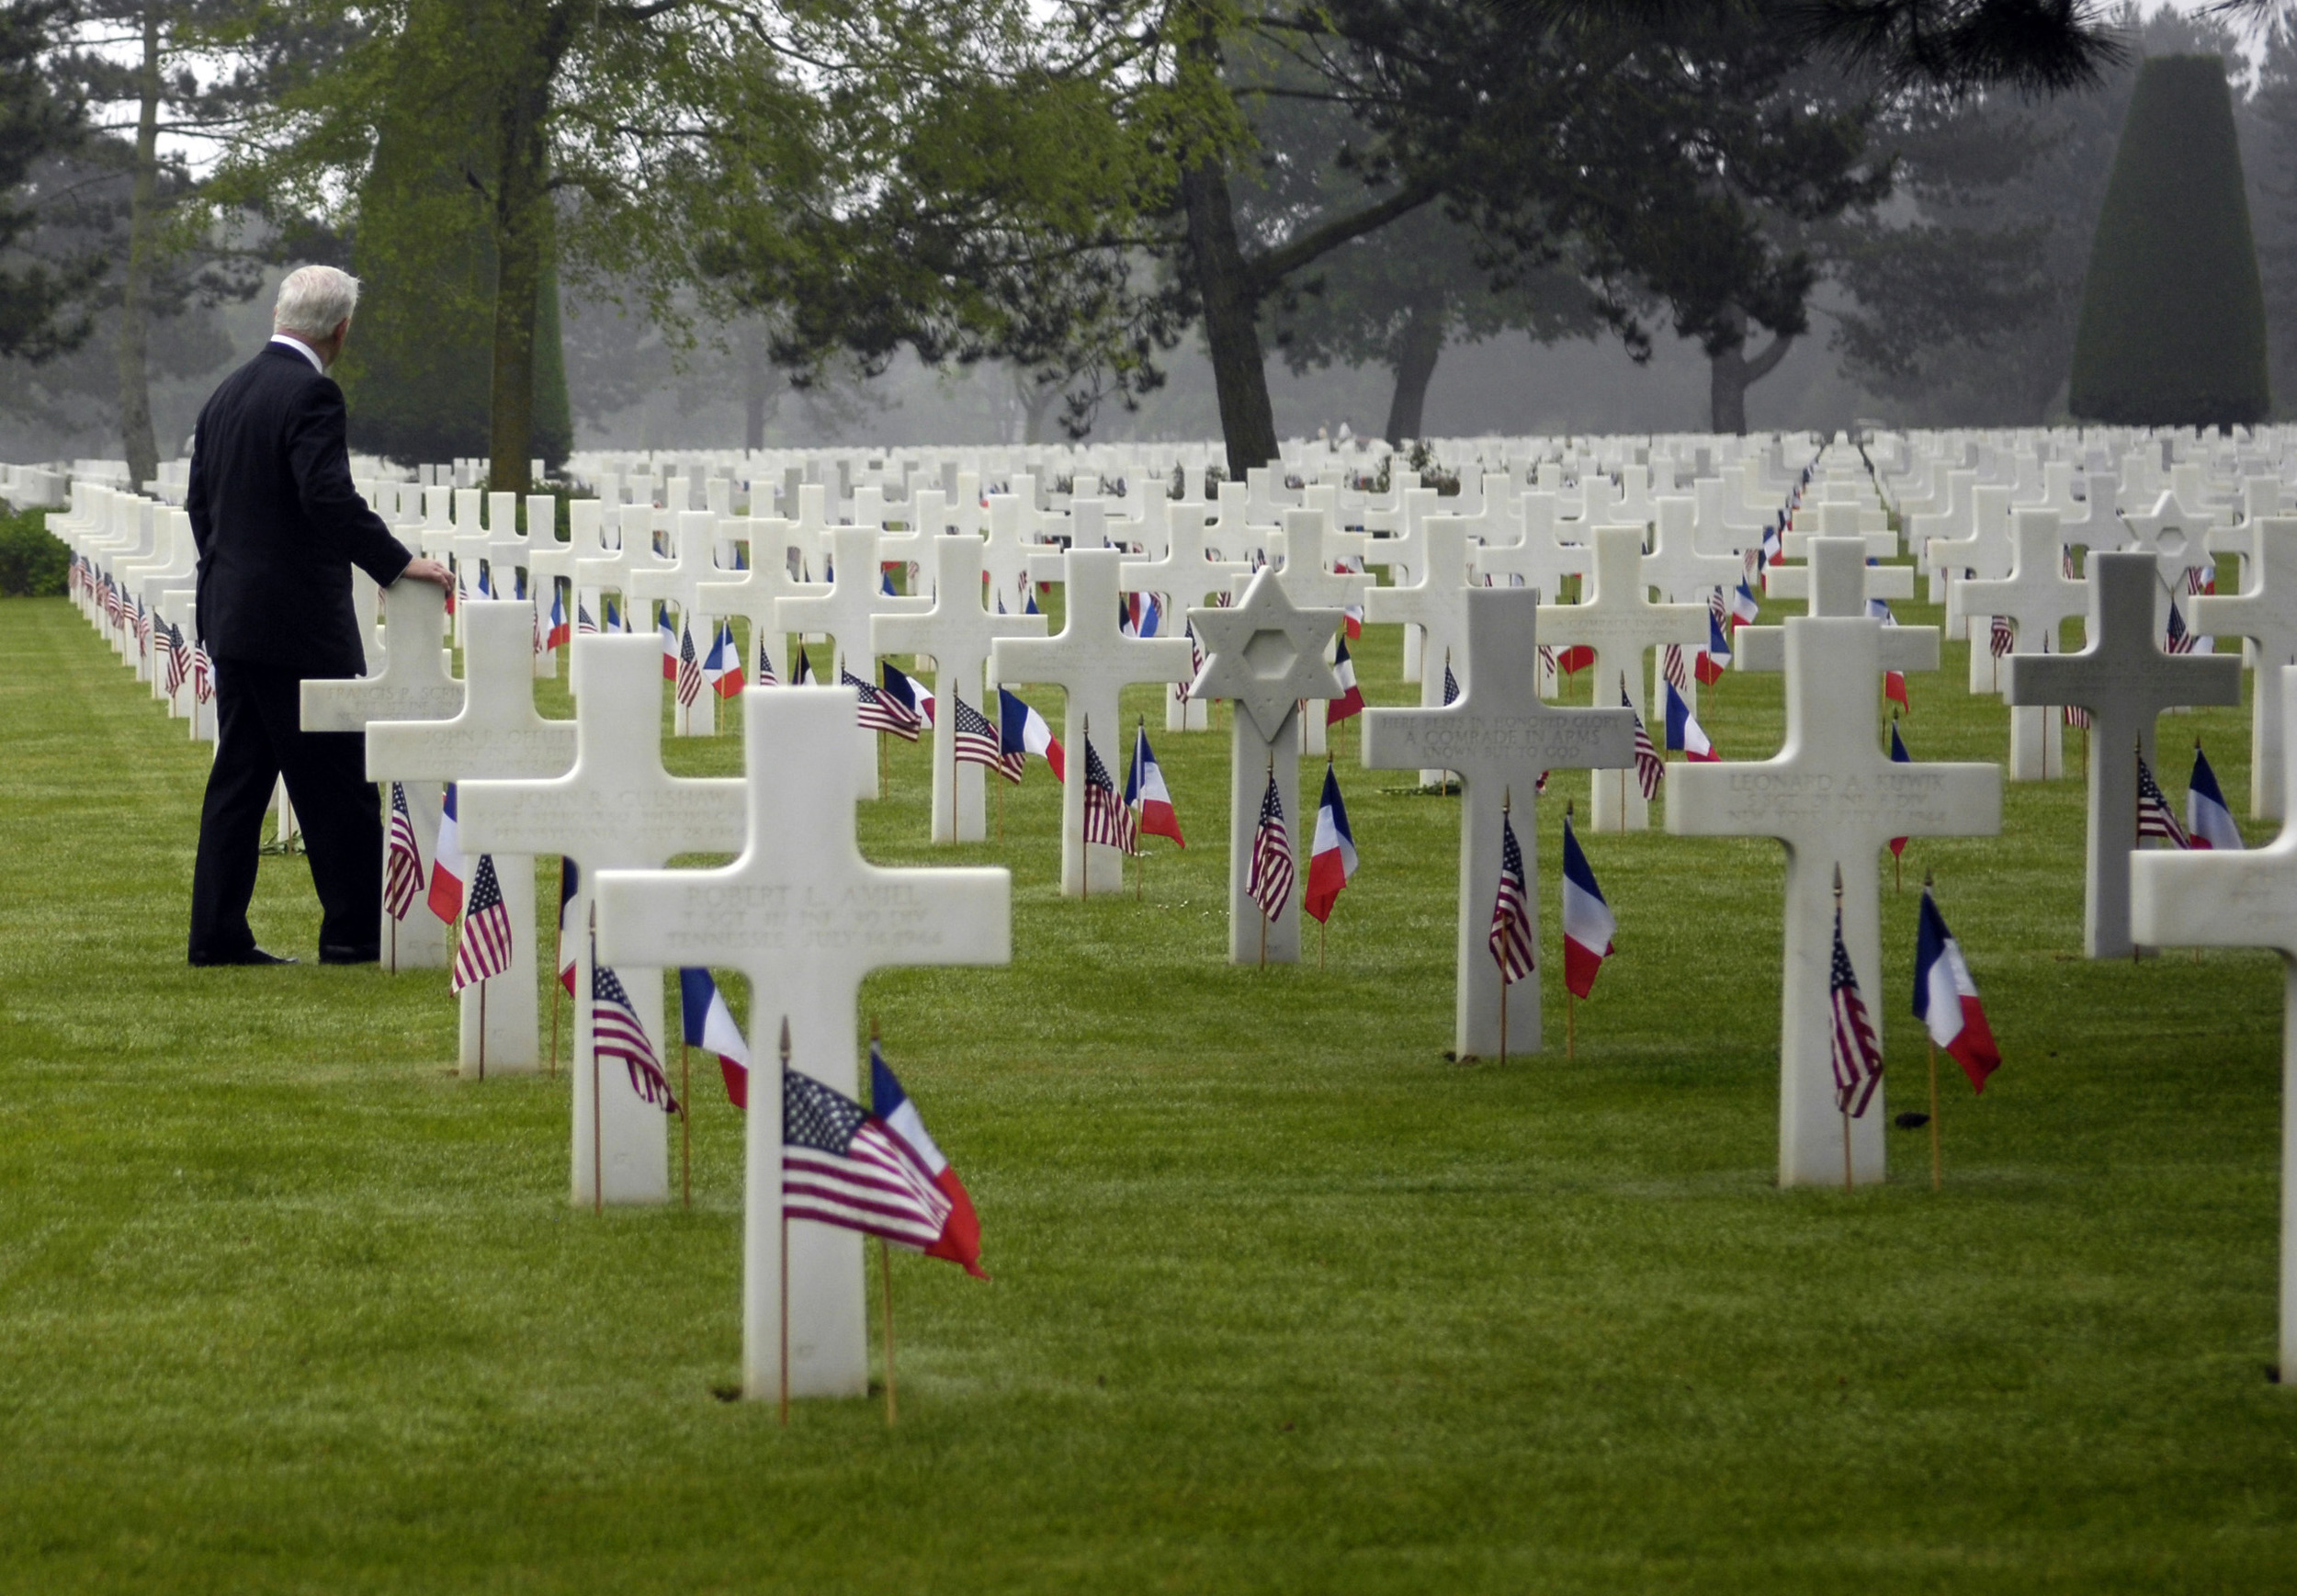 1st gallery picture-D-Day-Cemetery-2.jpg